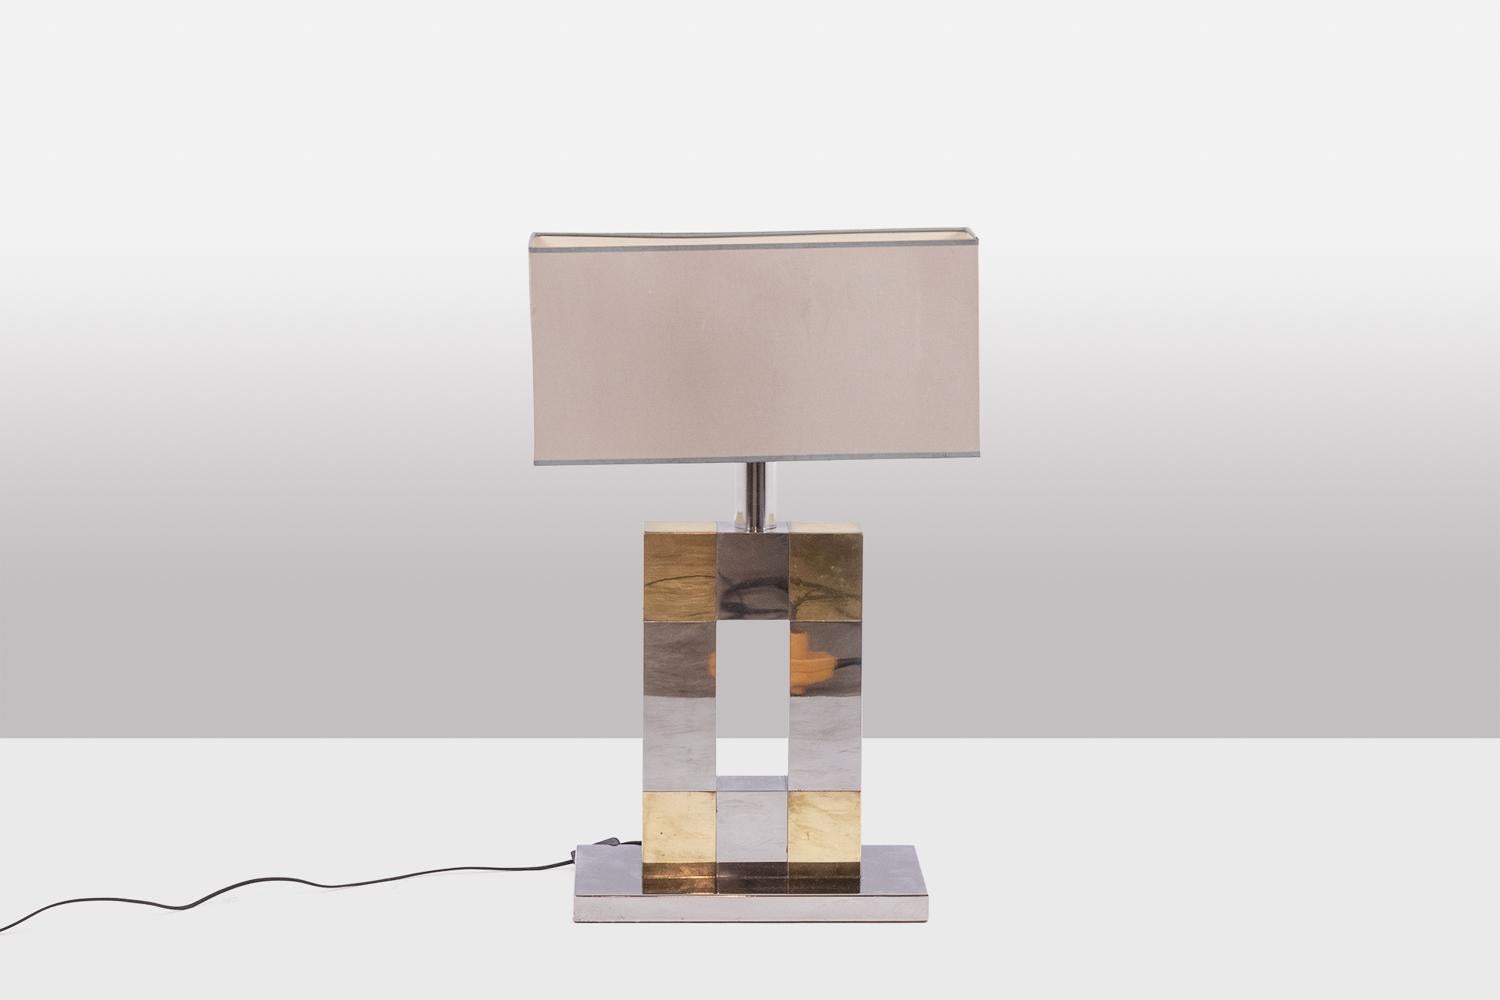 Geometric lamp in silver and gold metal, openwork in the center, with its rectangular base. Rectangular shaped lampshade.

Italian work realized in the 1970s.

Dimensions: H 77 x W 40,5 x D 24 cm

Reference: LS5792258U